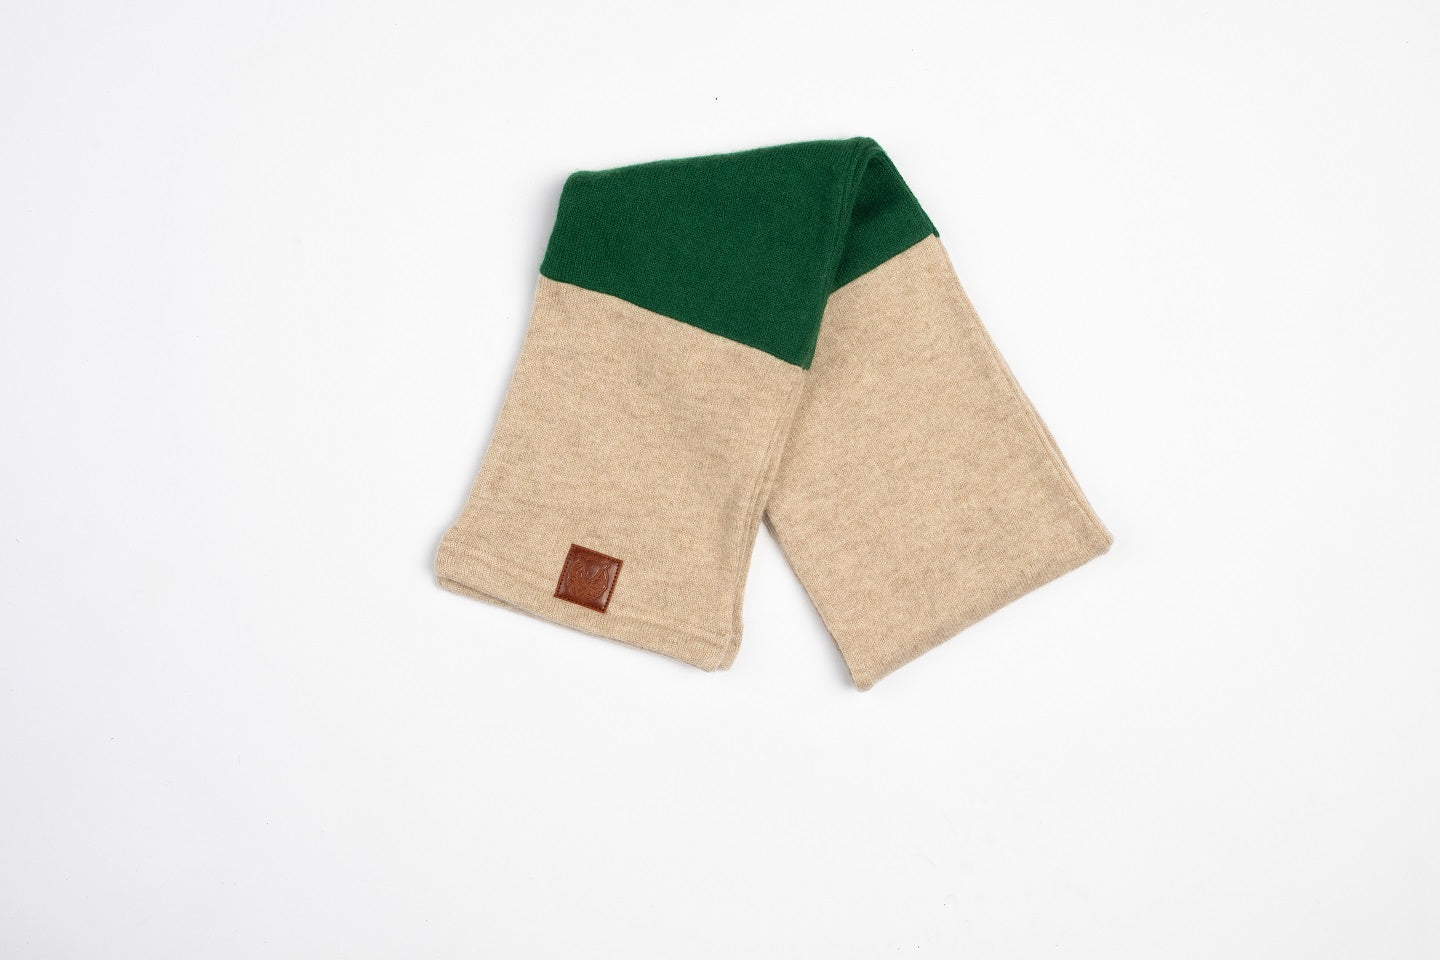 Green and Beige - Cashmere Open Scarf for Kids